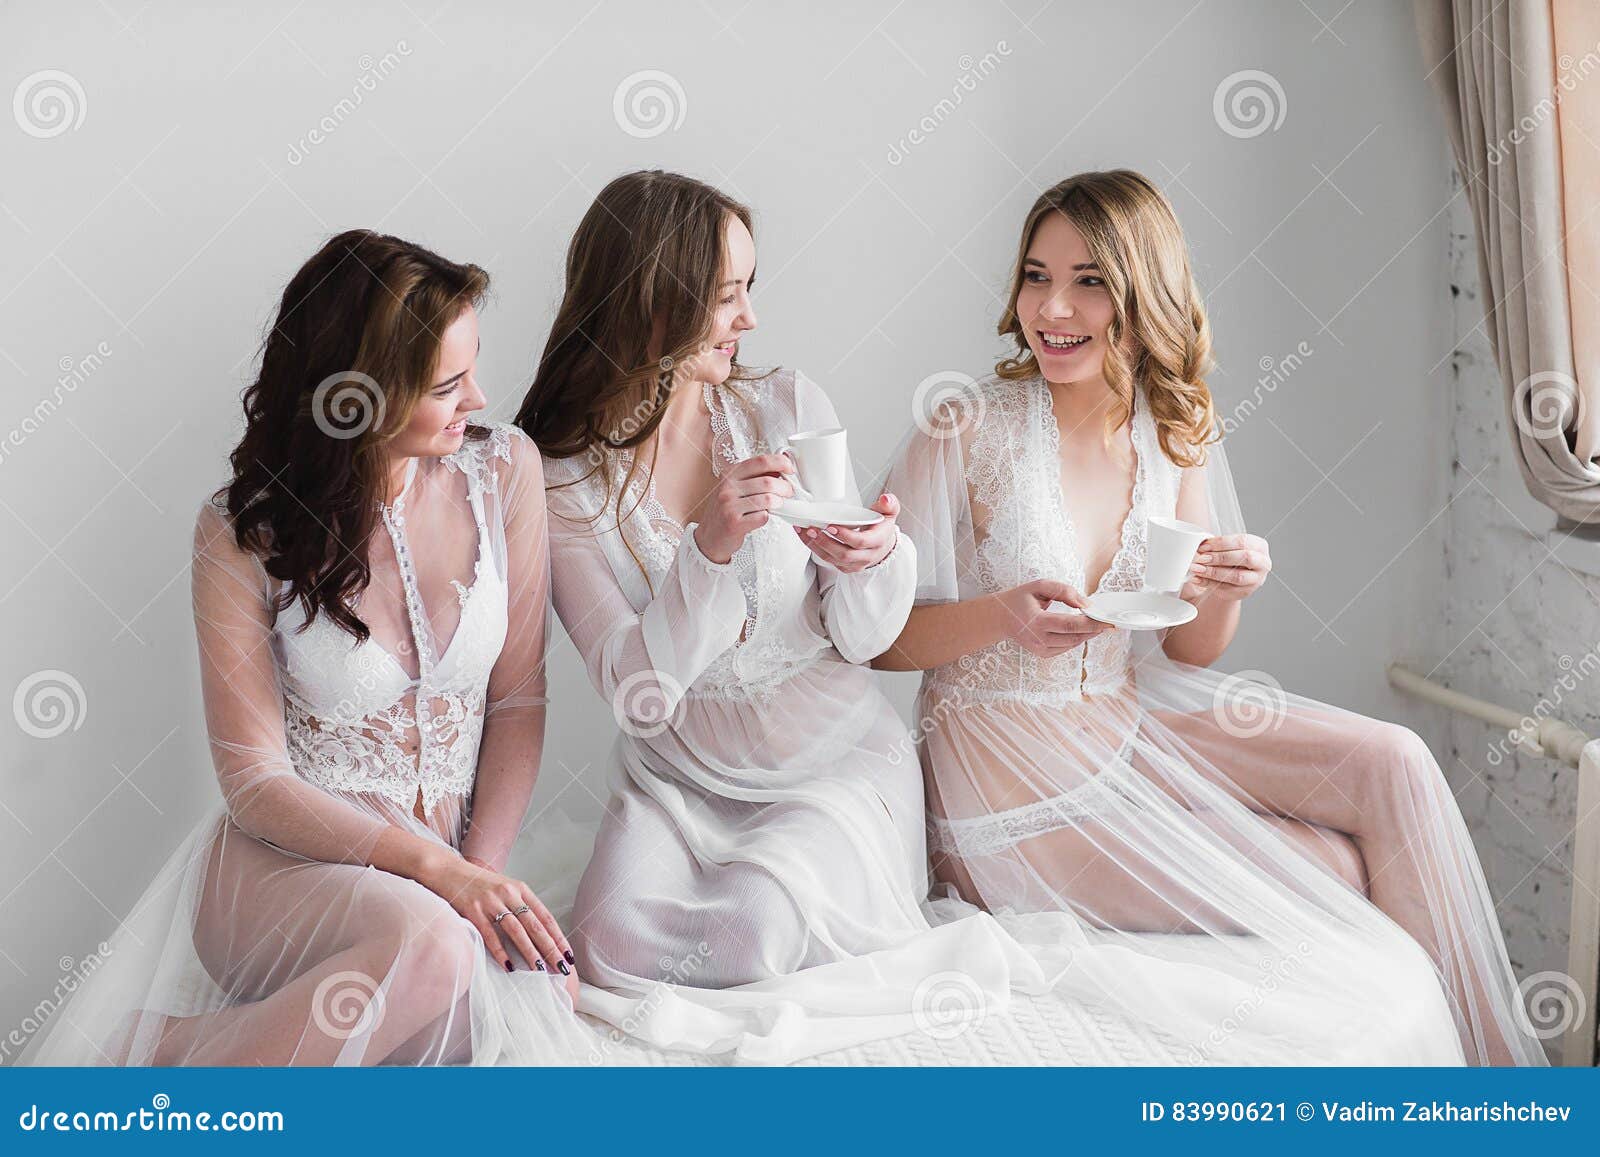 Bridesmaids in lingerie Three Bridesmaid Sisters In A Bright Room In Lingerie Stock Image Image Of Rich Passion 83990621